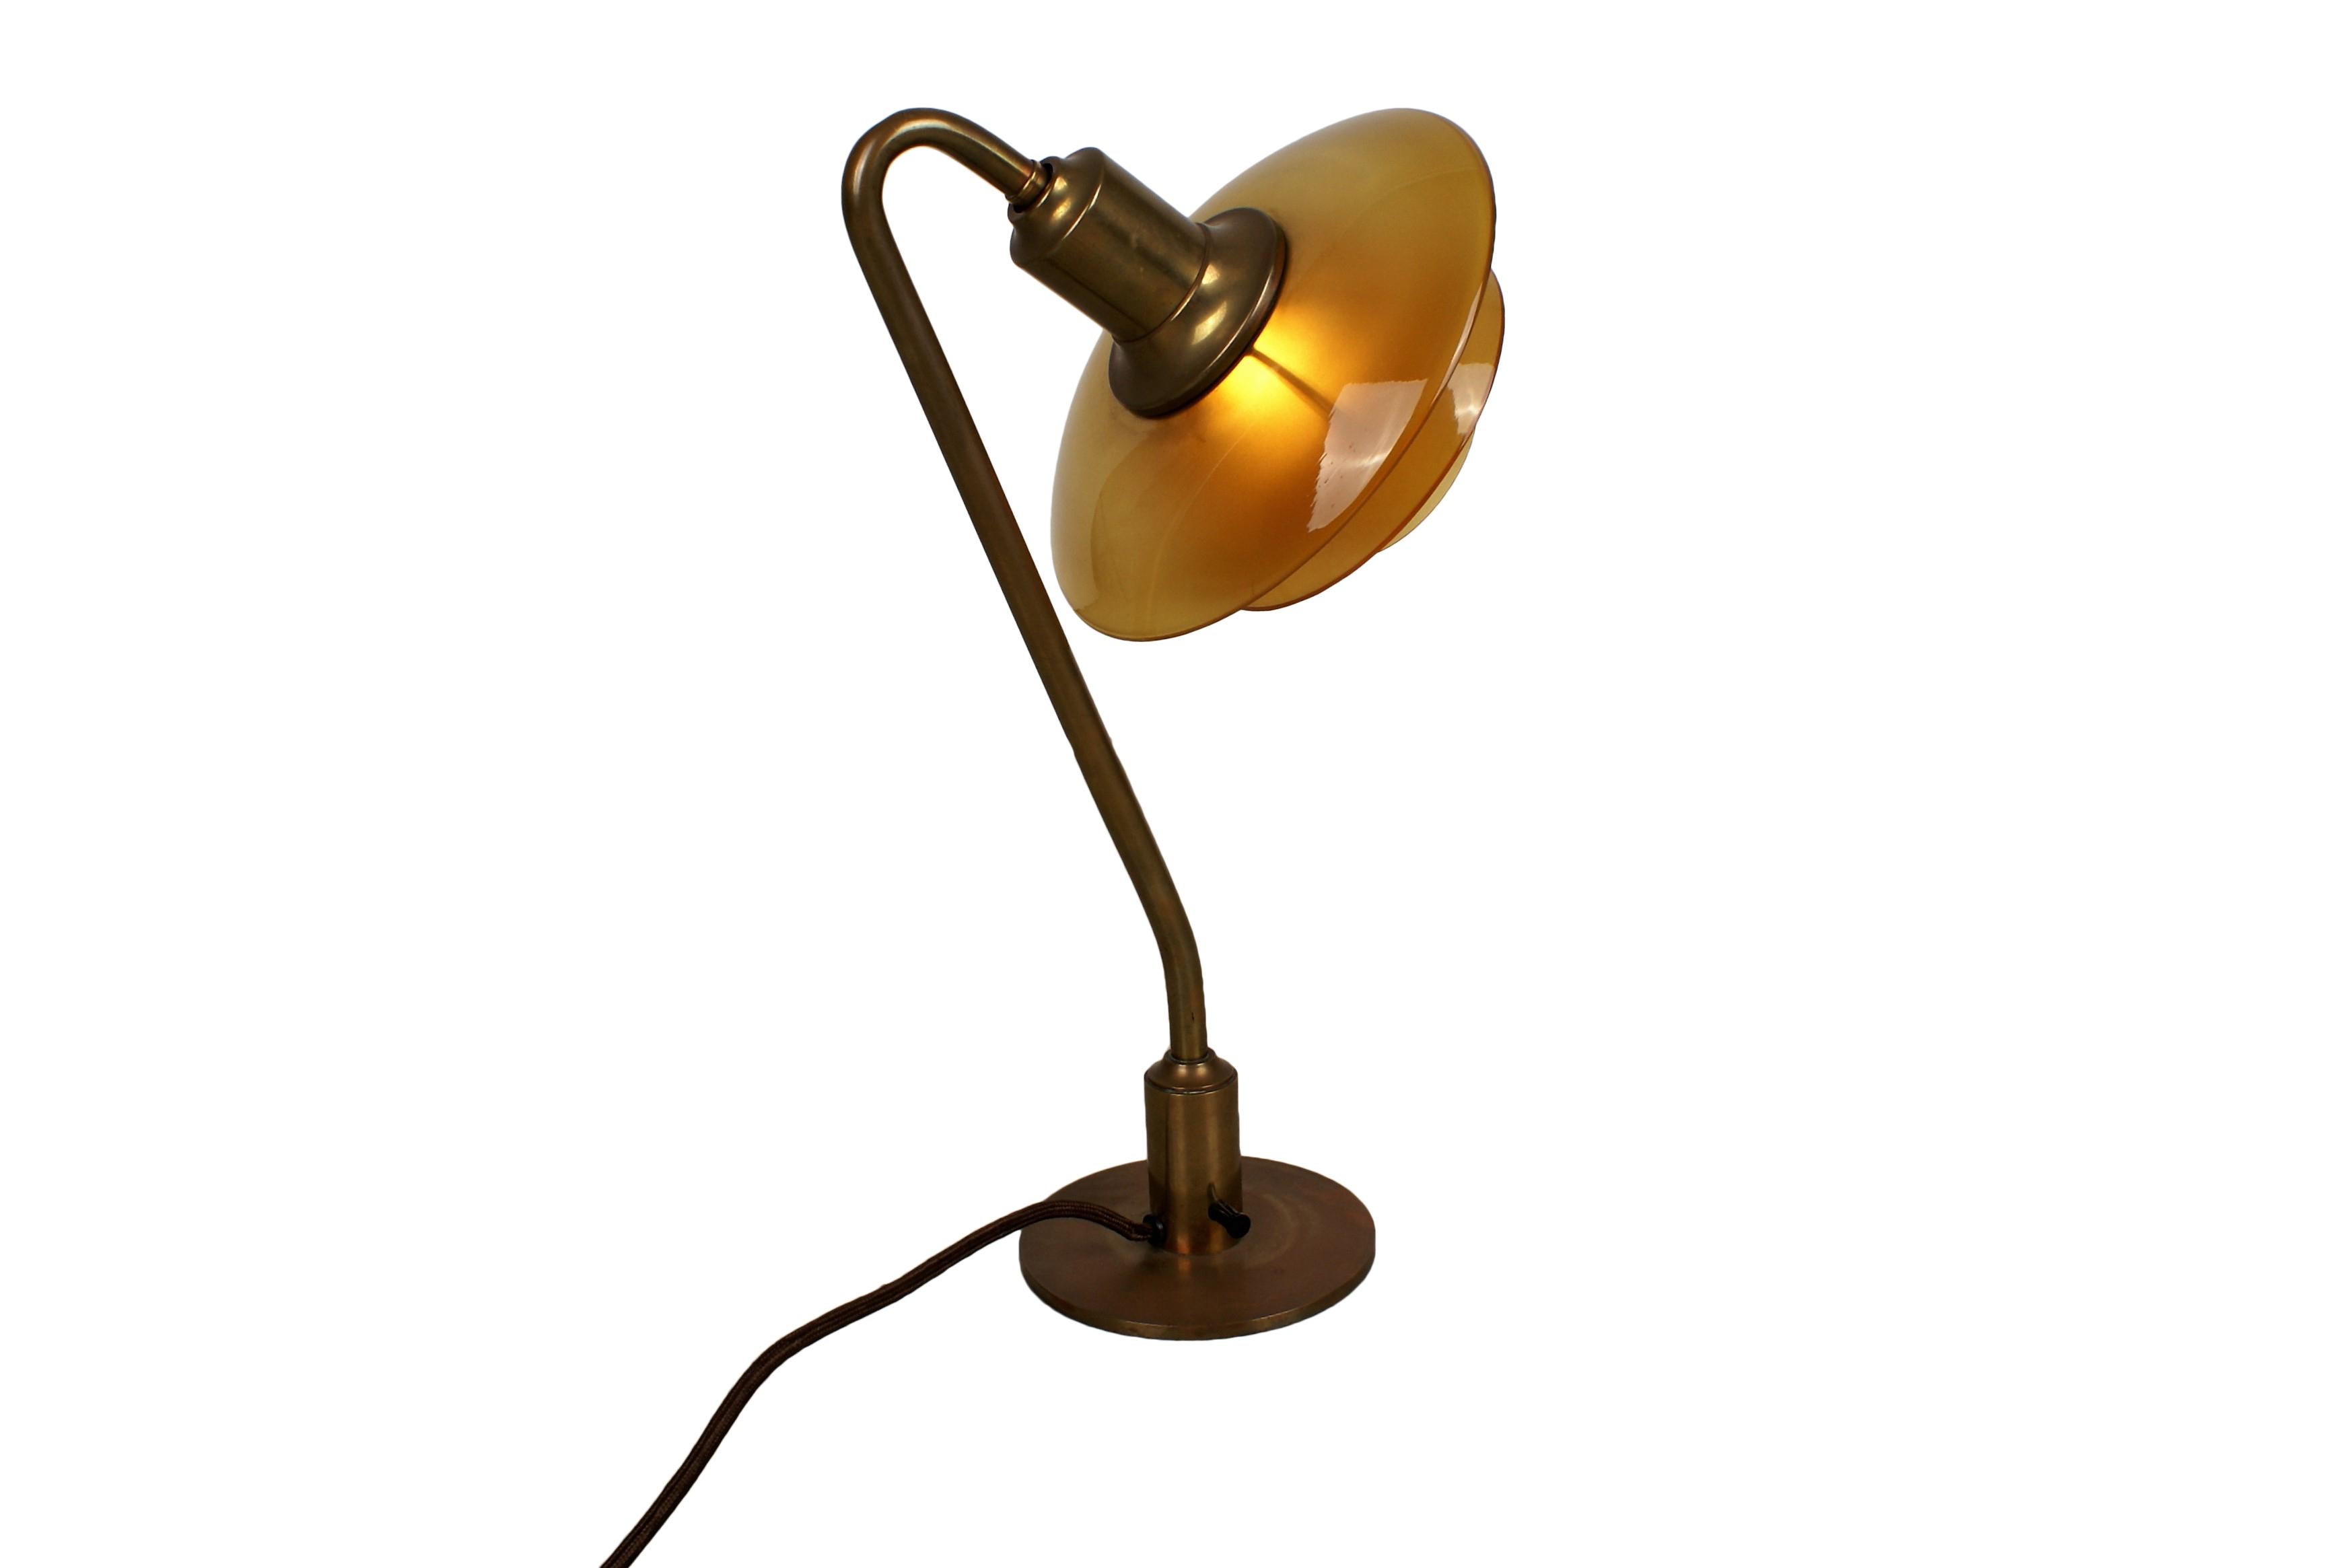 Danish Poul Henningsen 2/2 Snowdrop Desk Lamp in Brass with Amber Colored Glass, 1930s